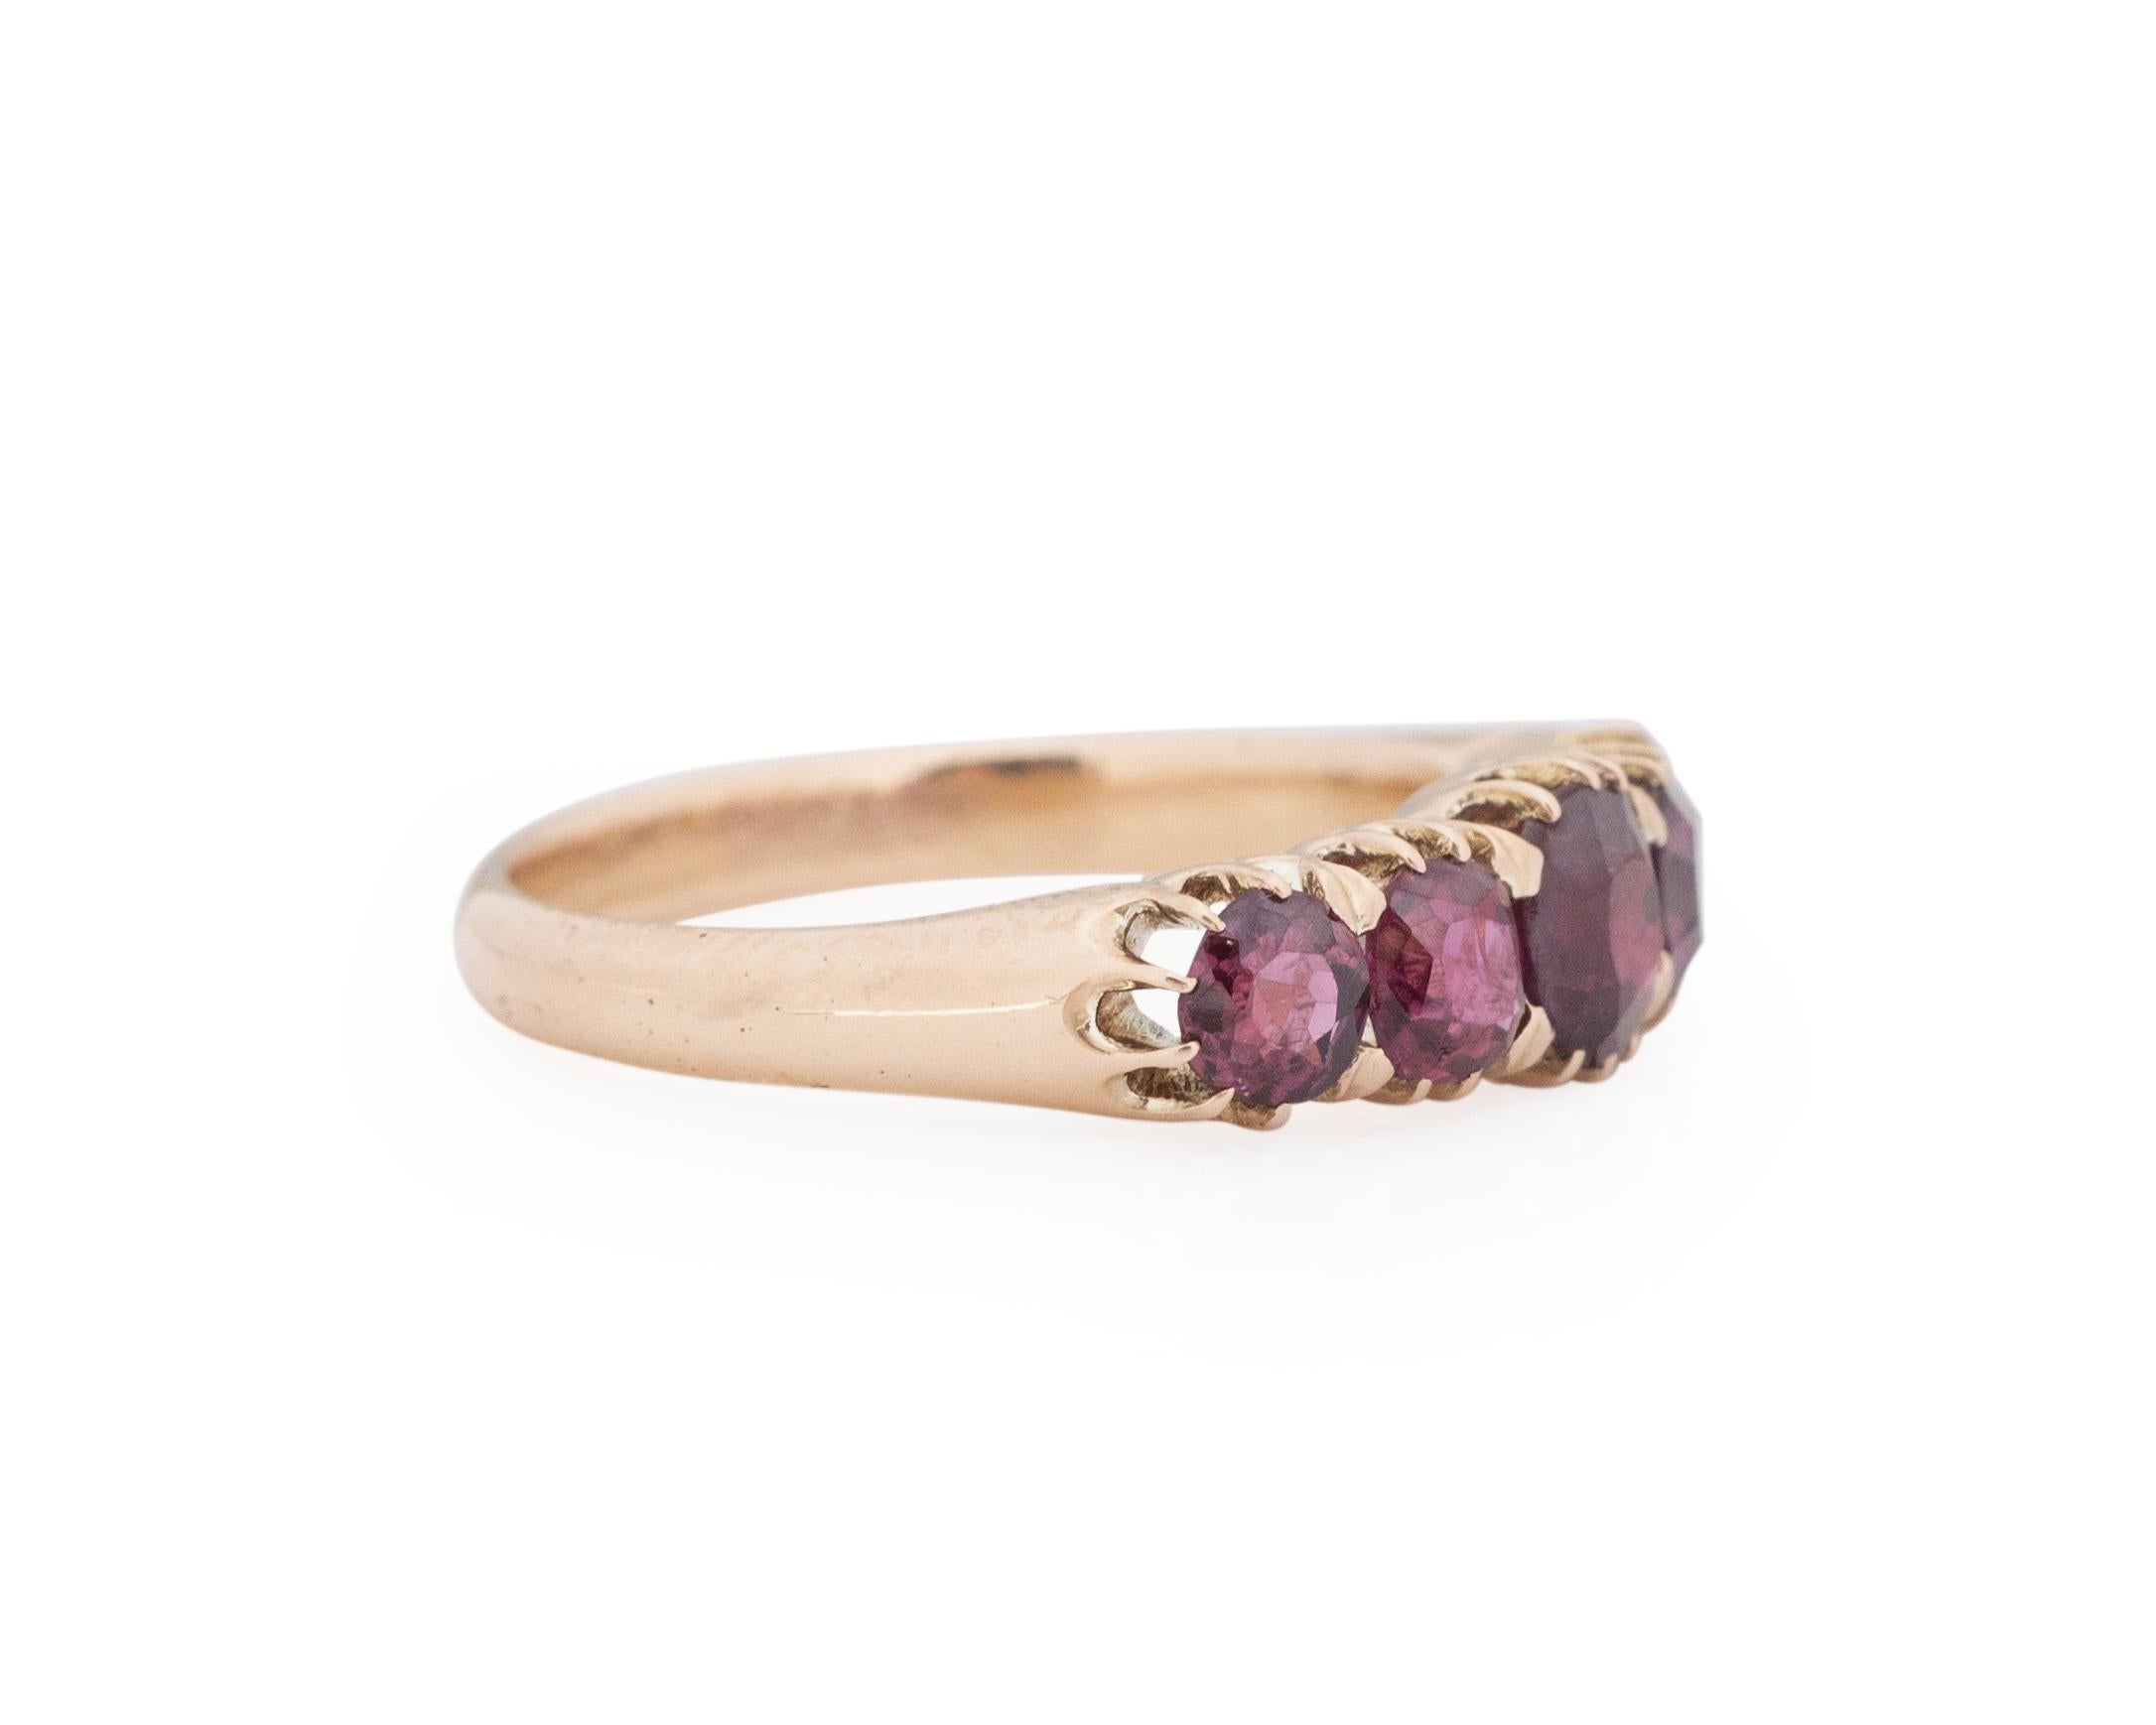 Item Details: 
Ring Size: 6.5
Metal Type: 14karat Rose Gold [Hallmarked, and Tested]
Weight: 2.0 grams

Ruby Details:
Type: Natural
Weight: 2.25carat, total
Cut: Antique Cushion
Color: Reddish Purple

Finger to Top of Stone Measurement: